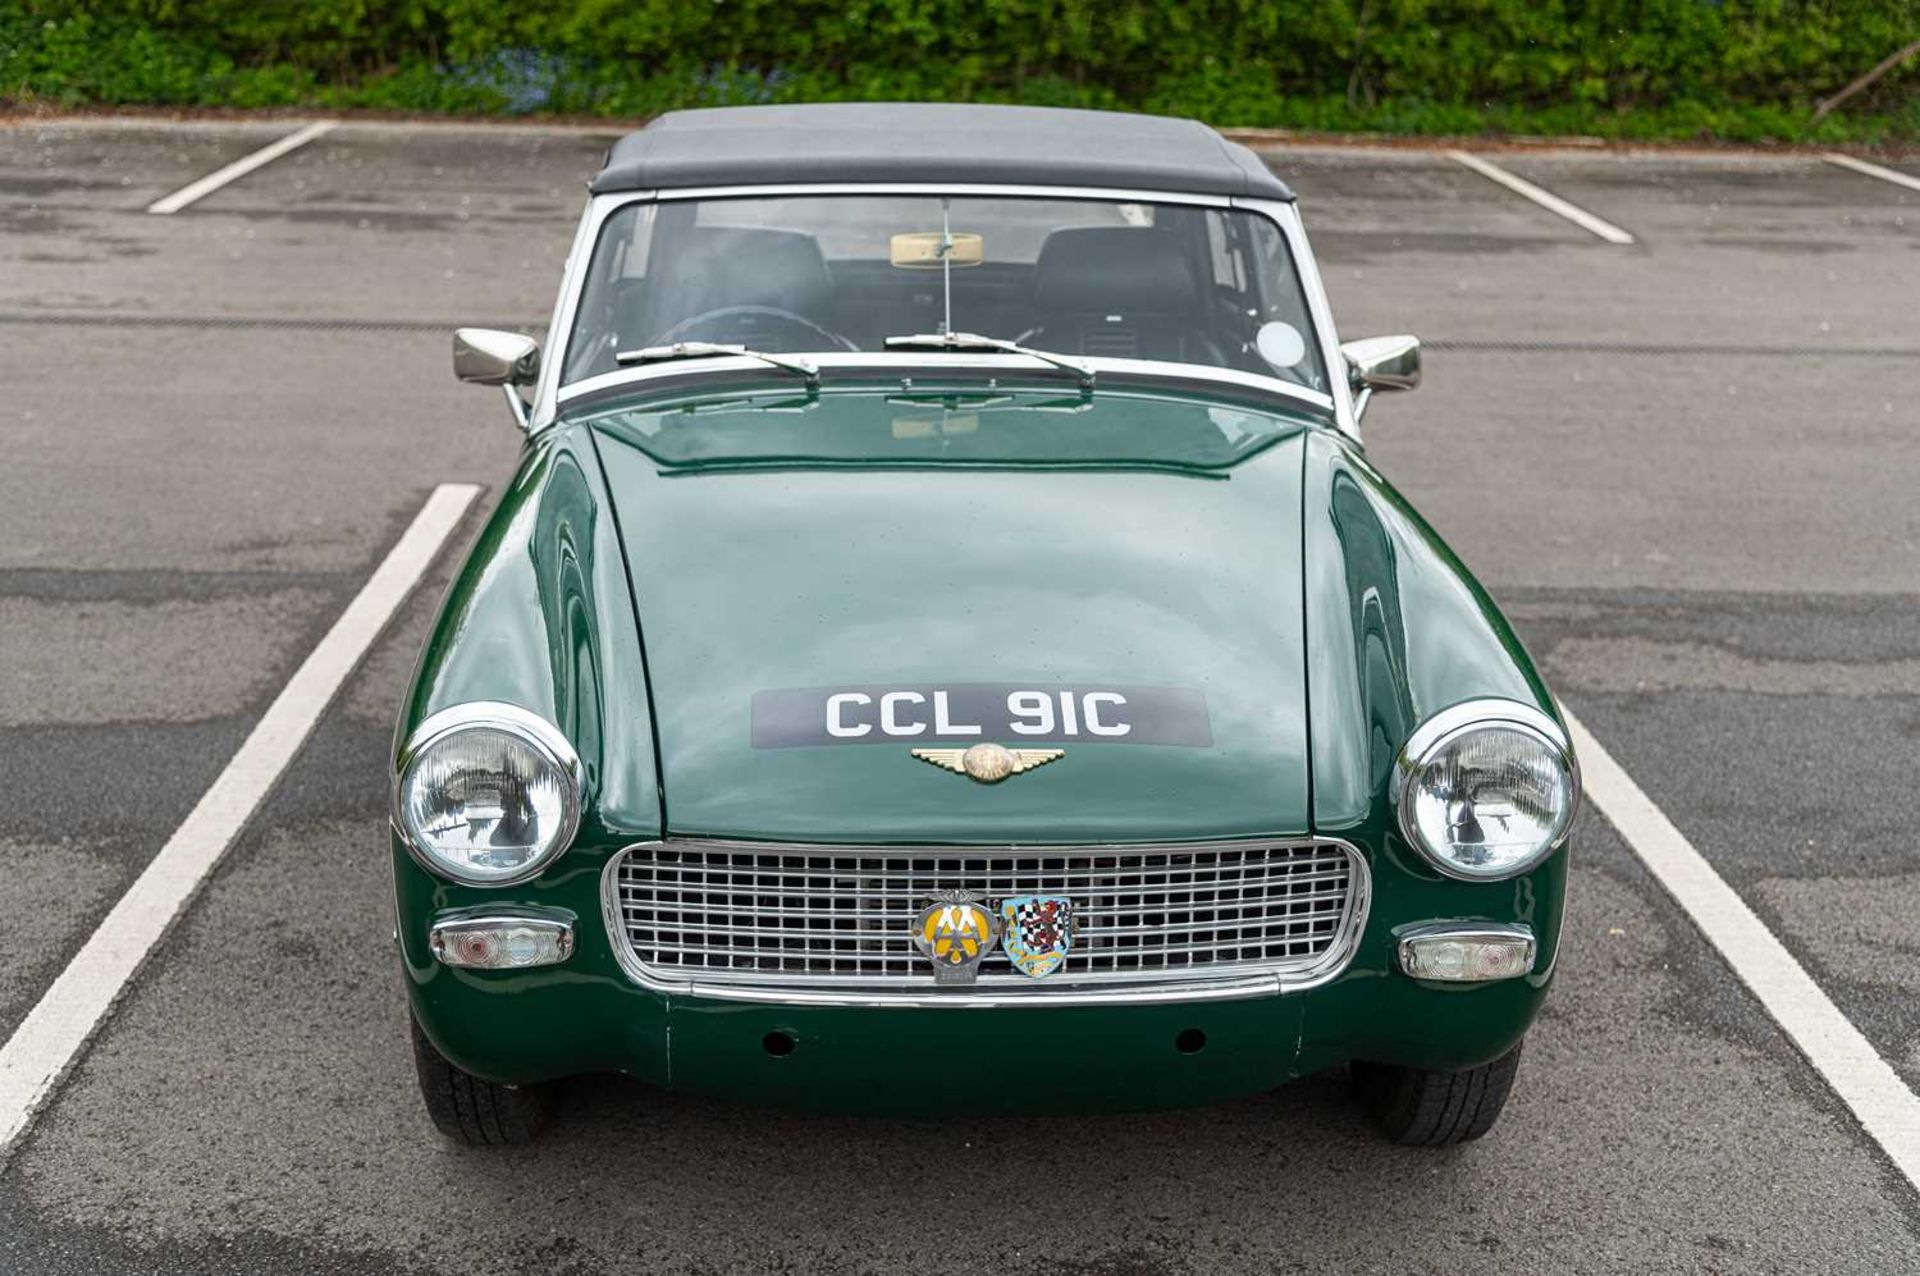 1965 Austin-Healey Sprite Formerly the property of British Formula One racing driver David Piper - Image 18 of 71